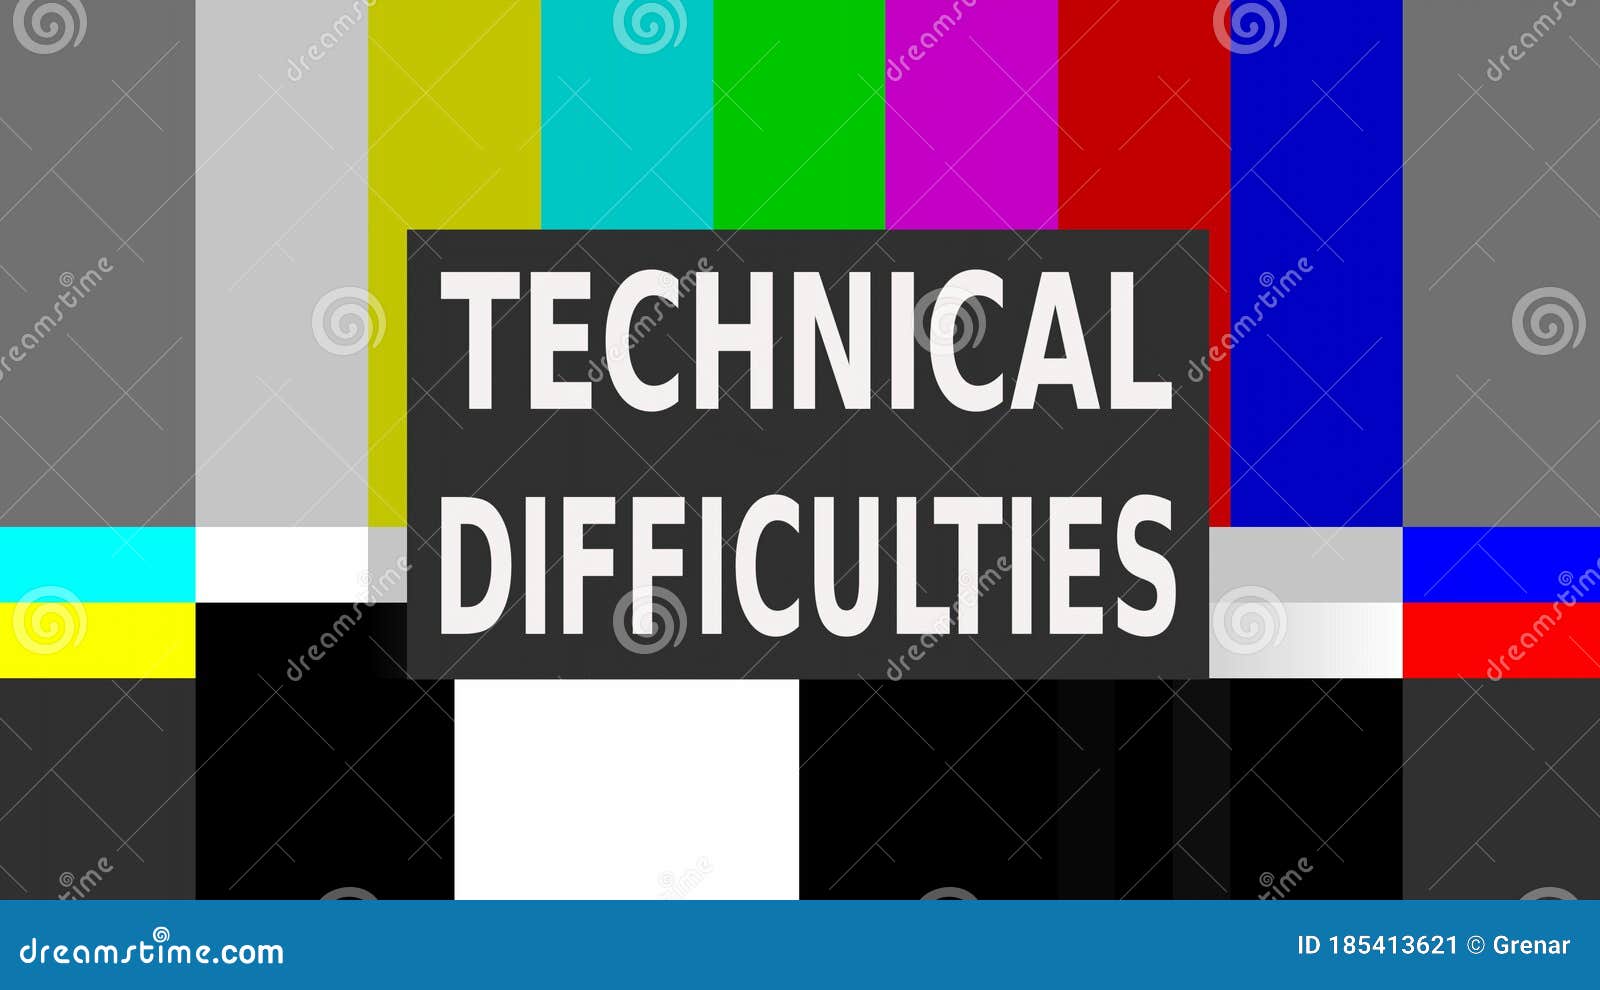 technical difficulties clean